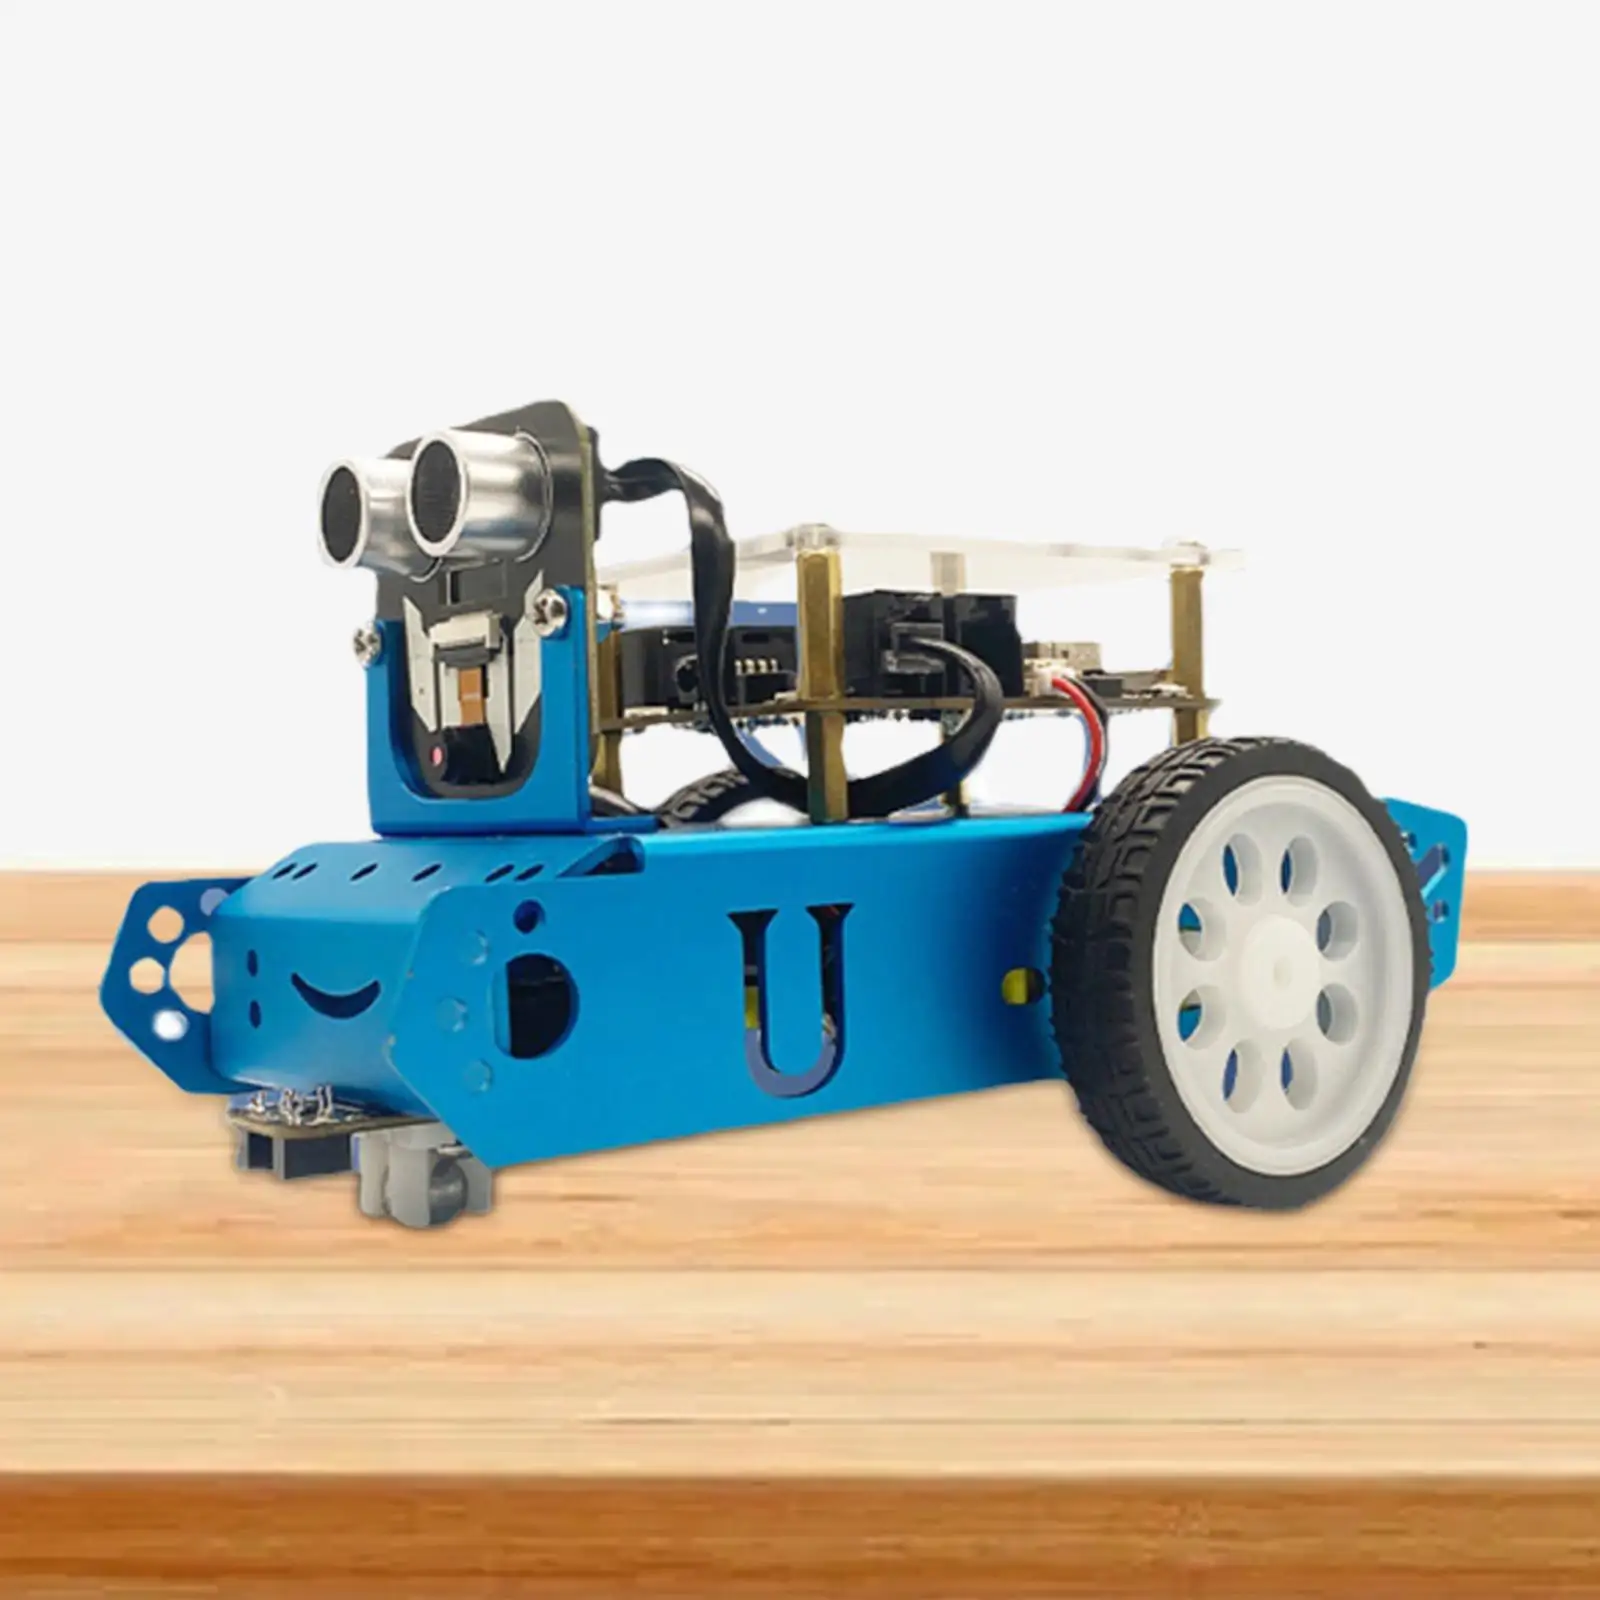 Programming Thrust Robot Coding for Mathematics Hands on Electronic Learning